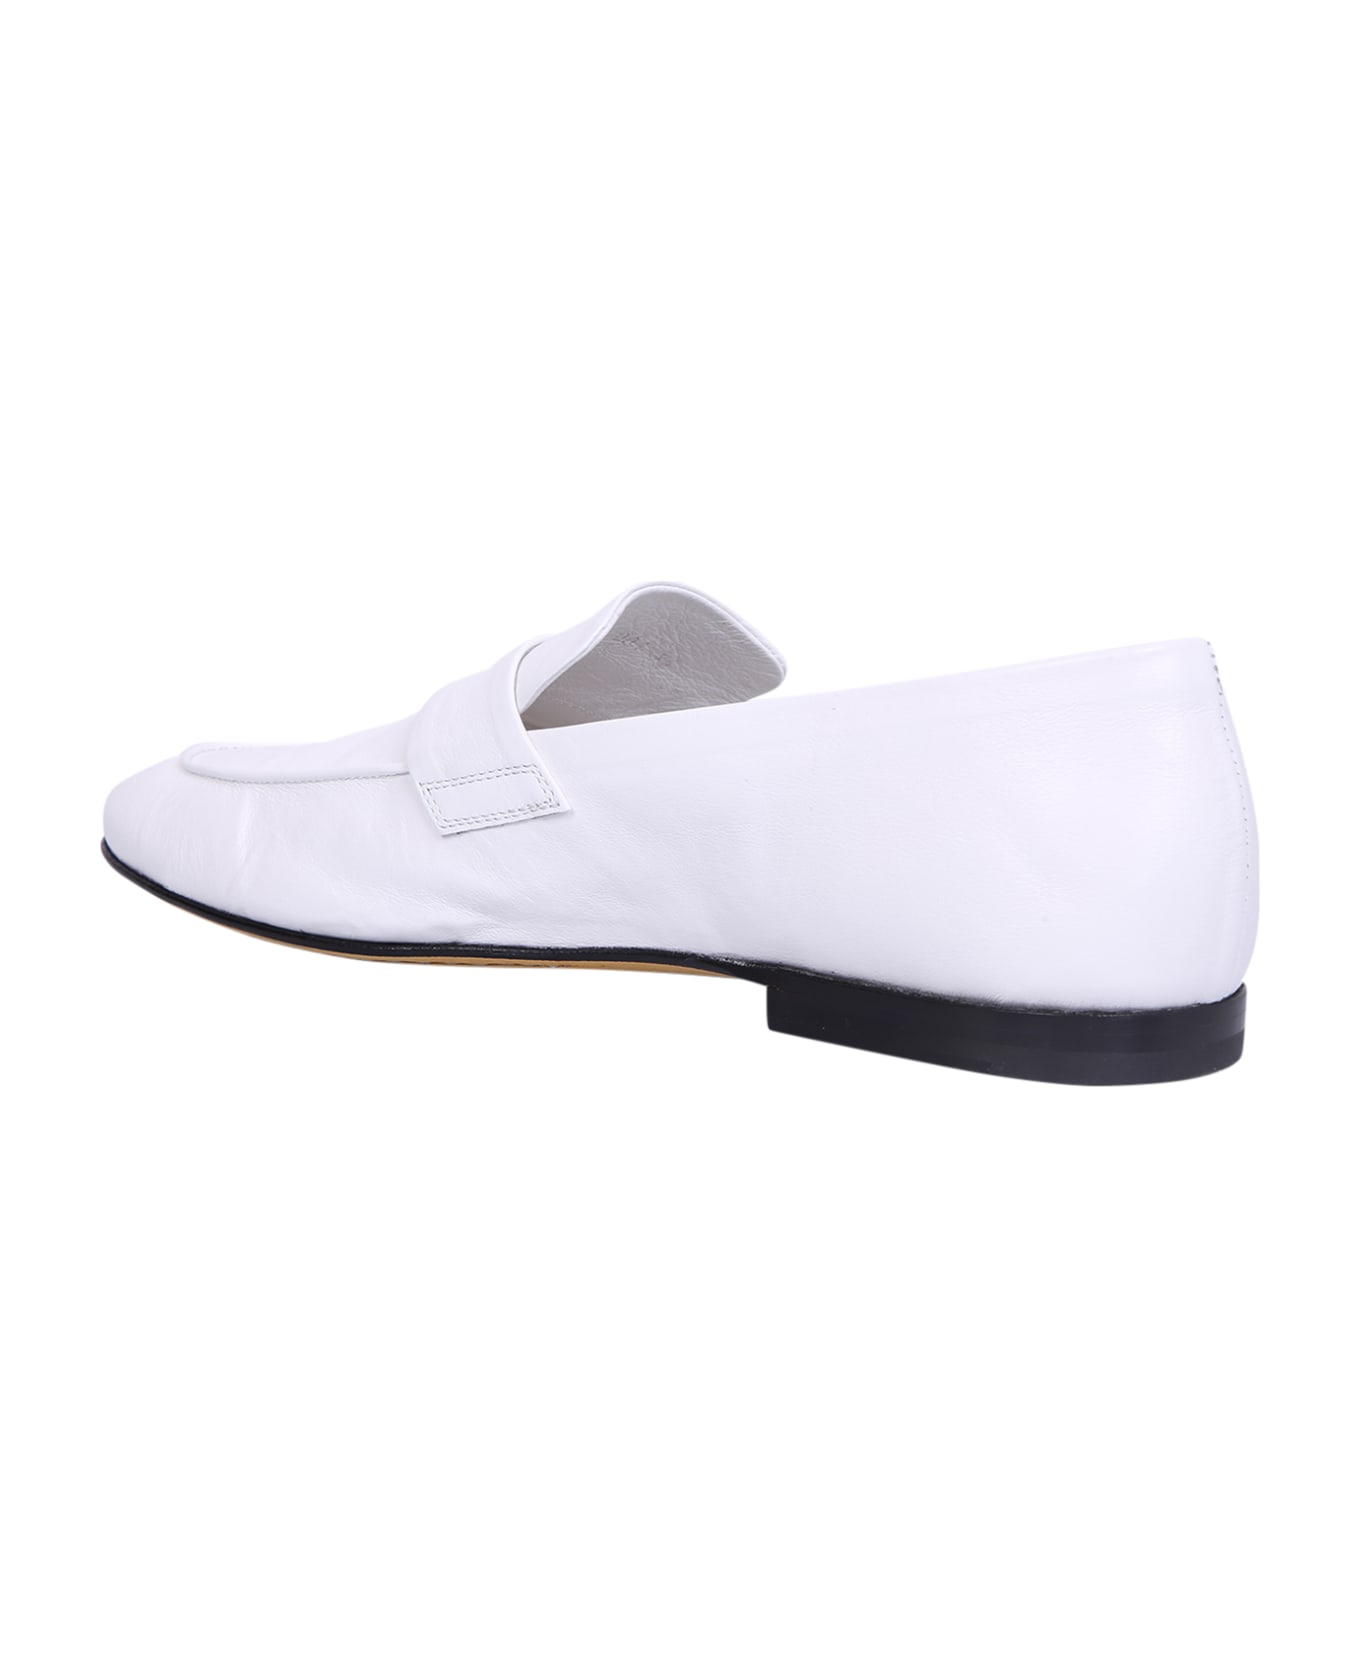 Officine Creative Airto 1 Leather White Loafers - White ローファー＆デッキシューズ